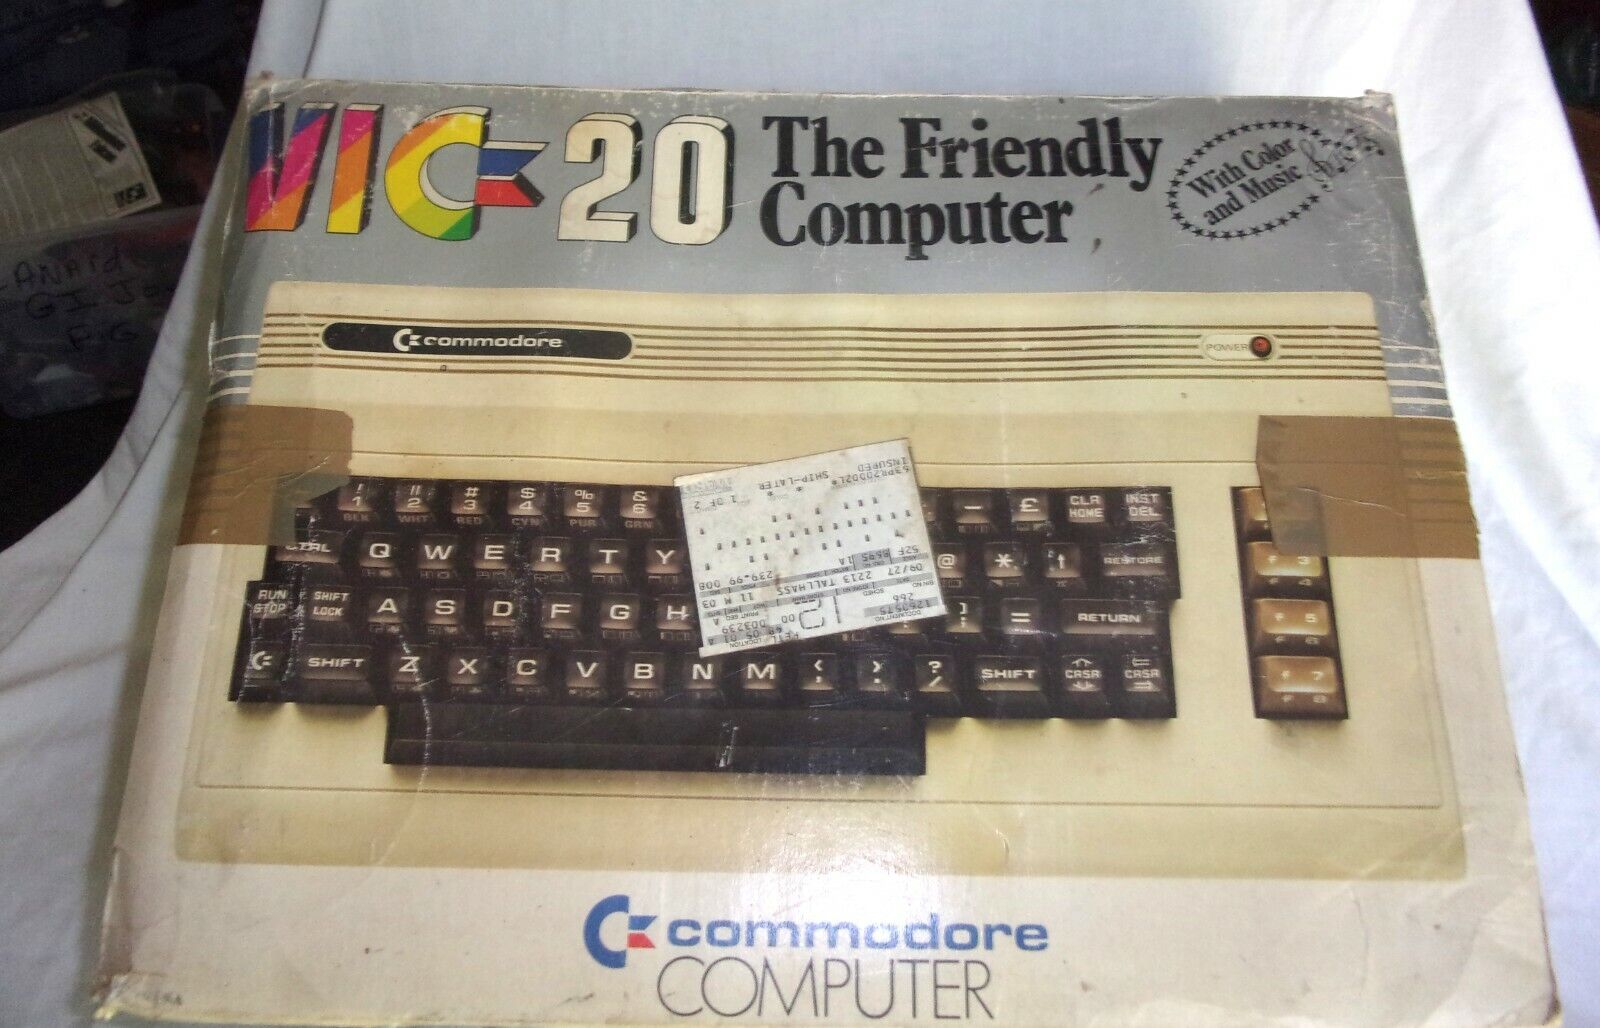 Vintage Commodore VIC-20 The Friendly Computer Untested  Boxed